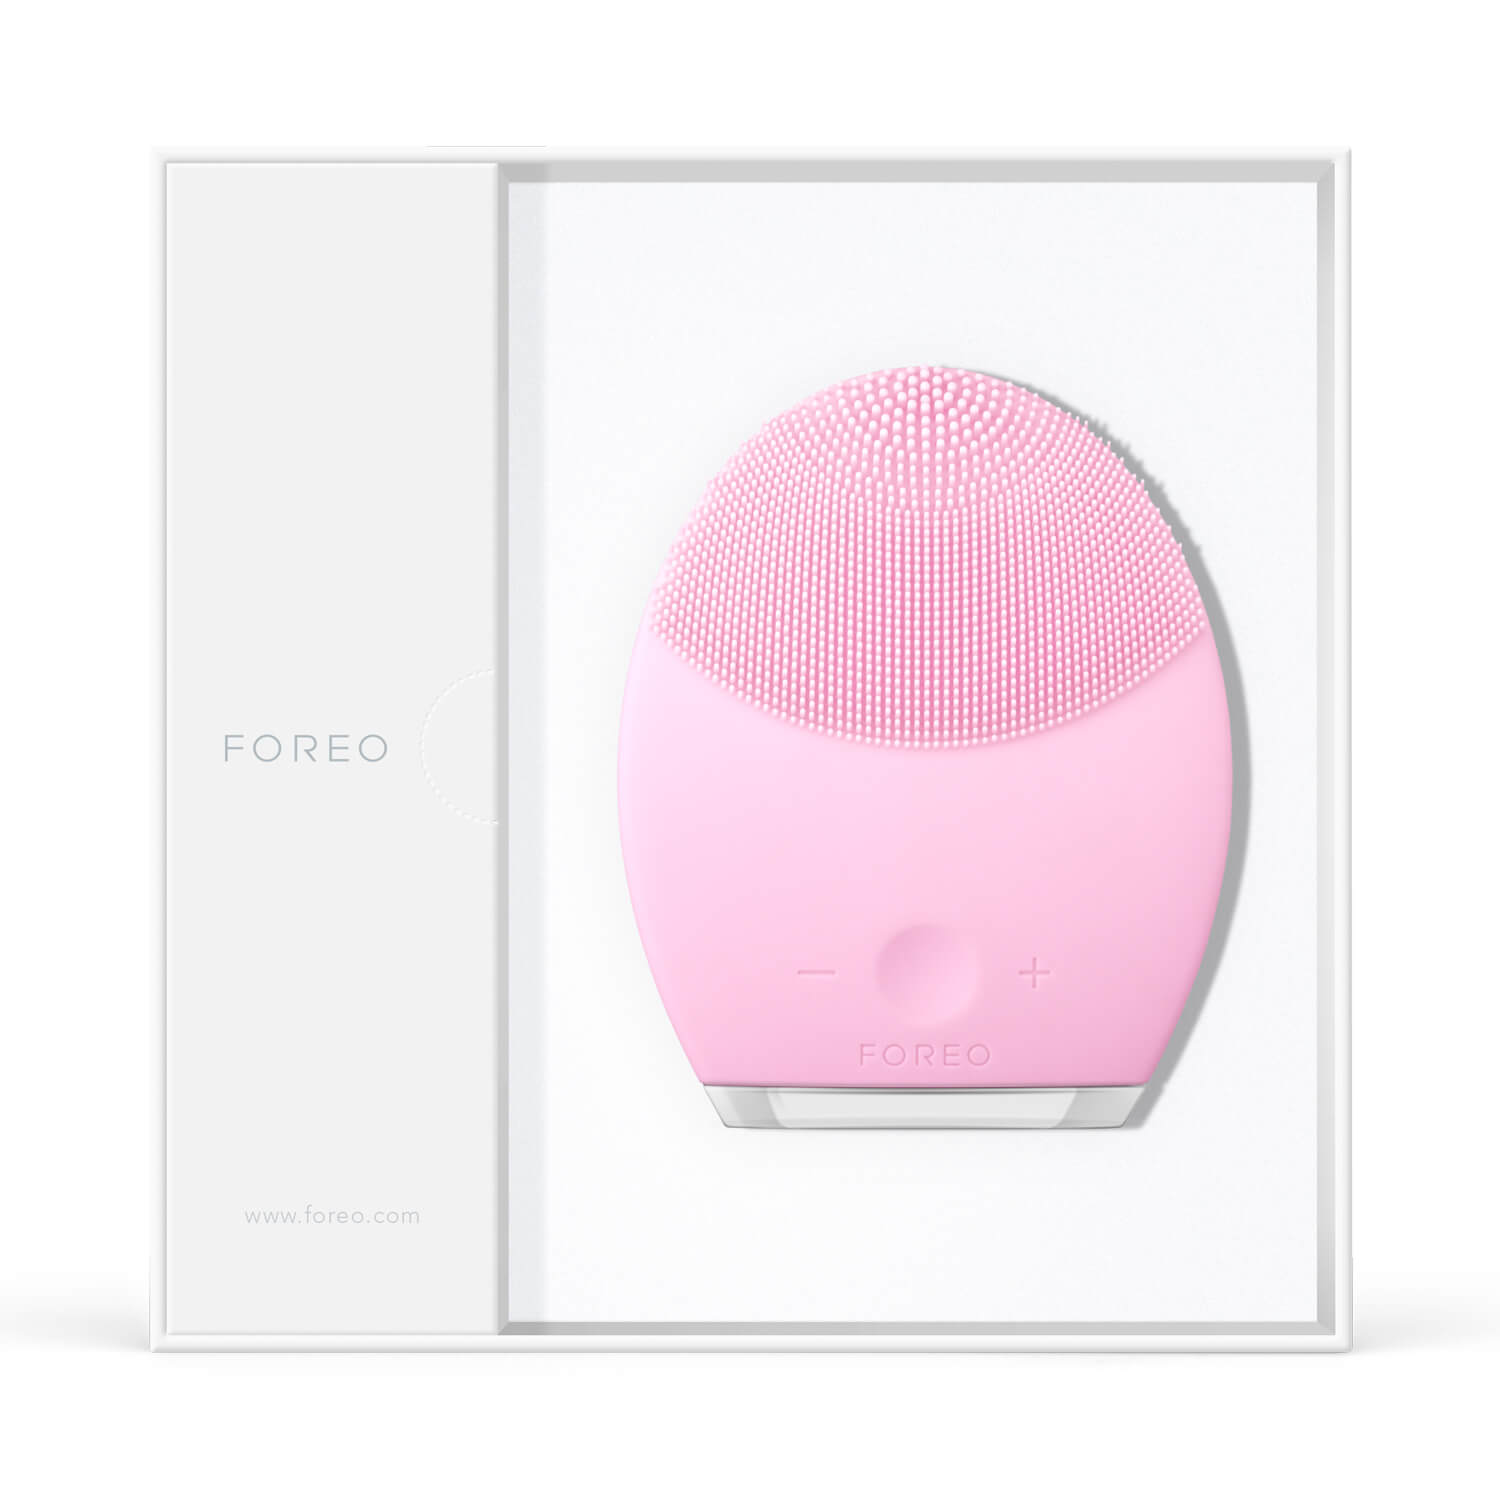 FOREO LUNA 2 Facial Cleansing Brush for Normal Skin Pink Inside the Box